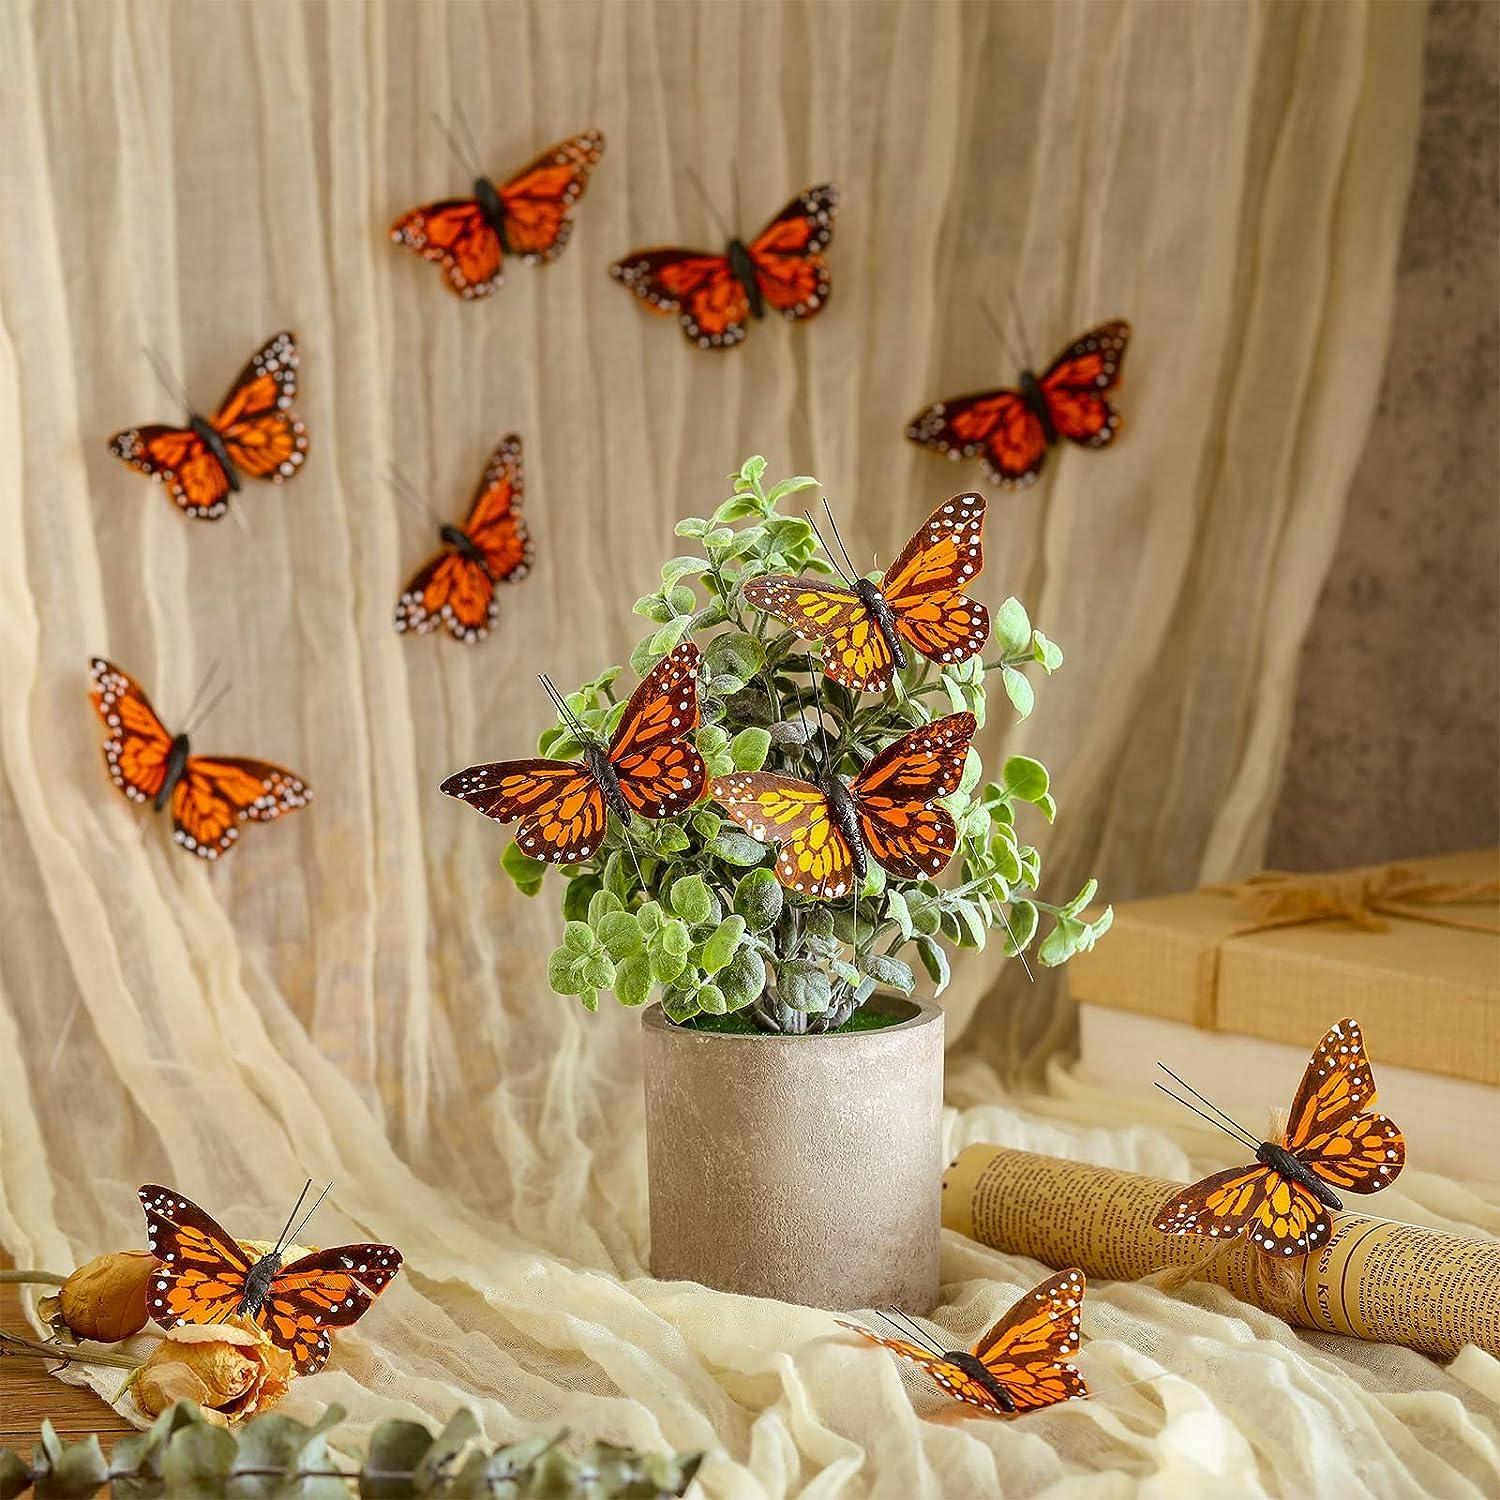 Save the Monarch Butterfly Kit : 12 Steps (with Pictures) - Instructables